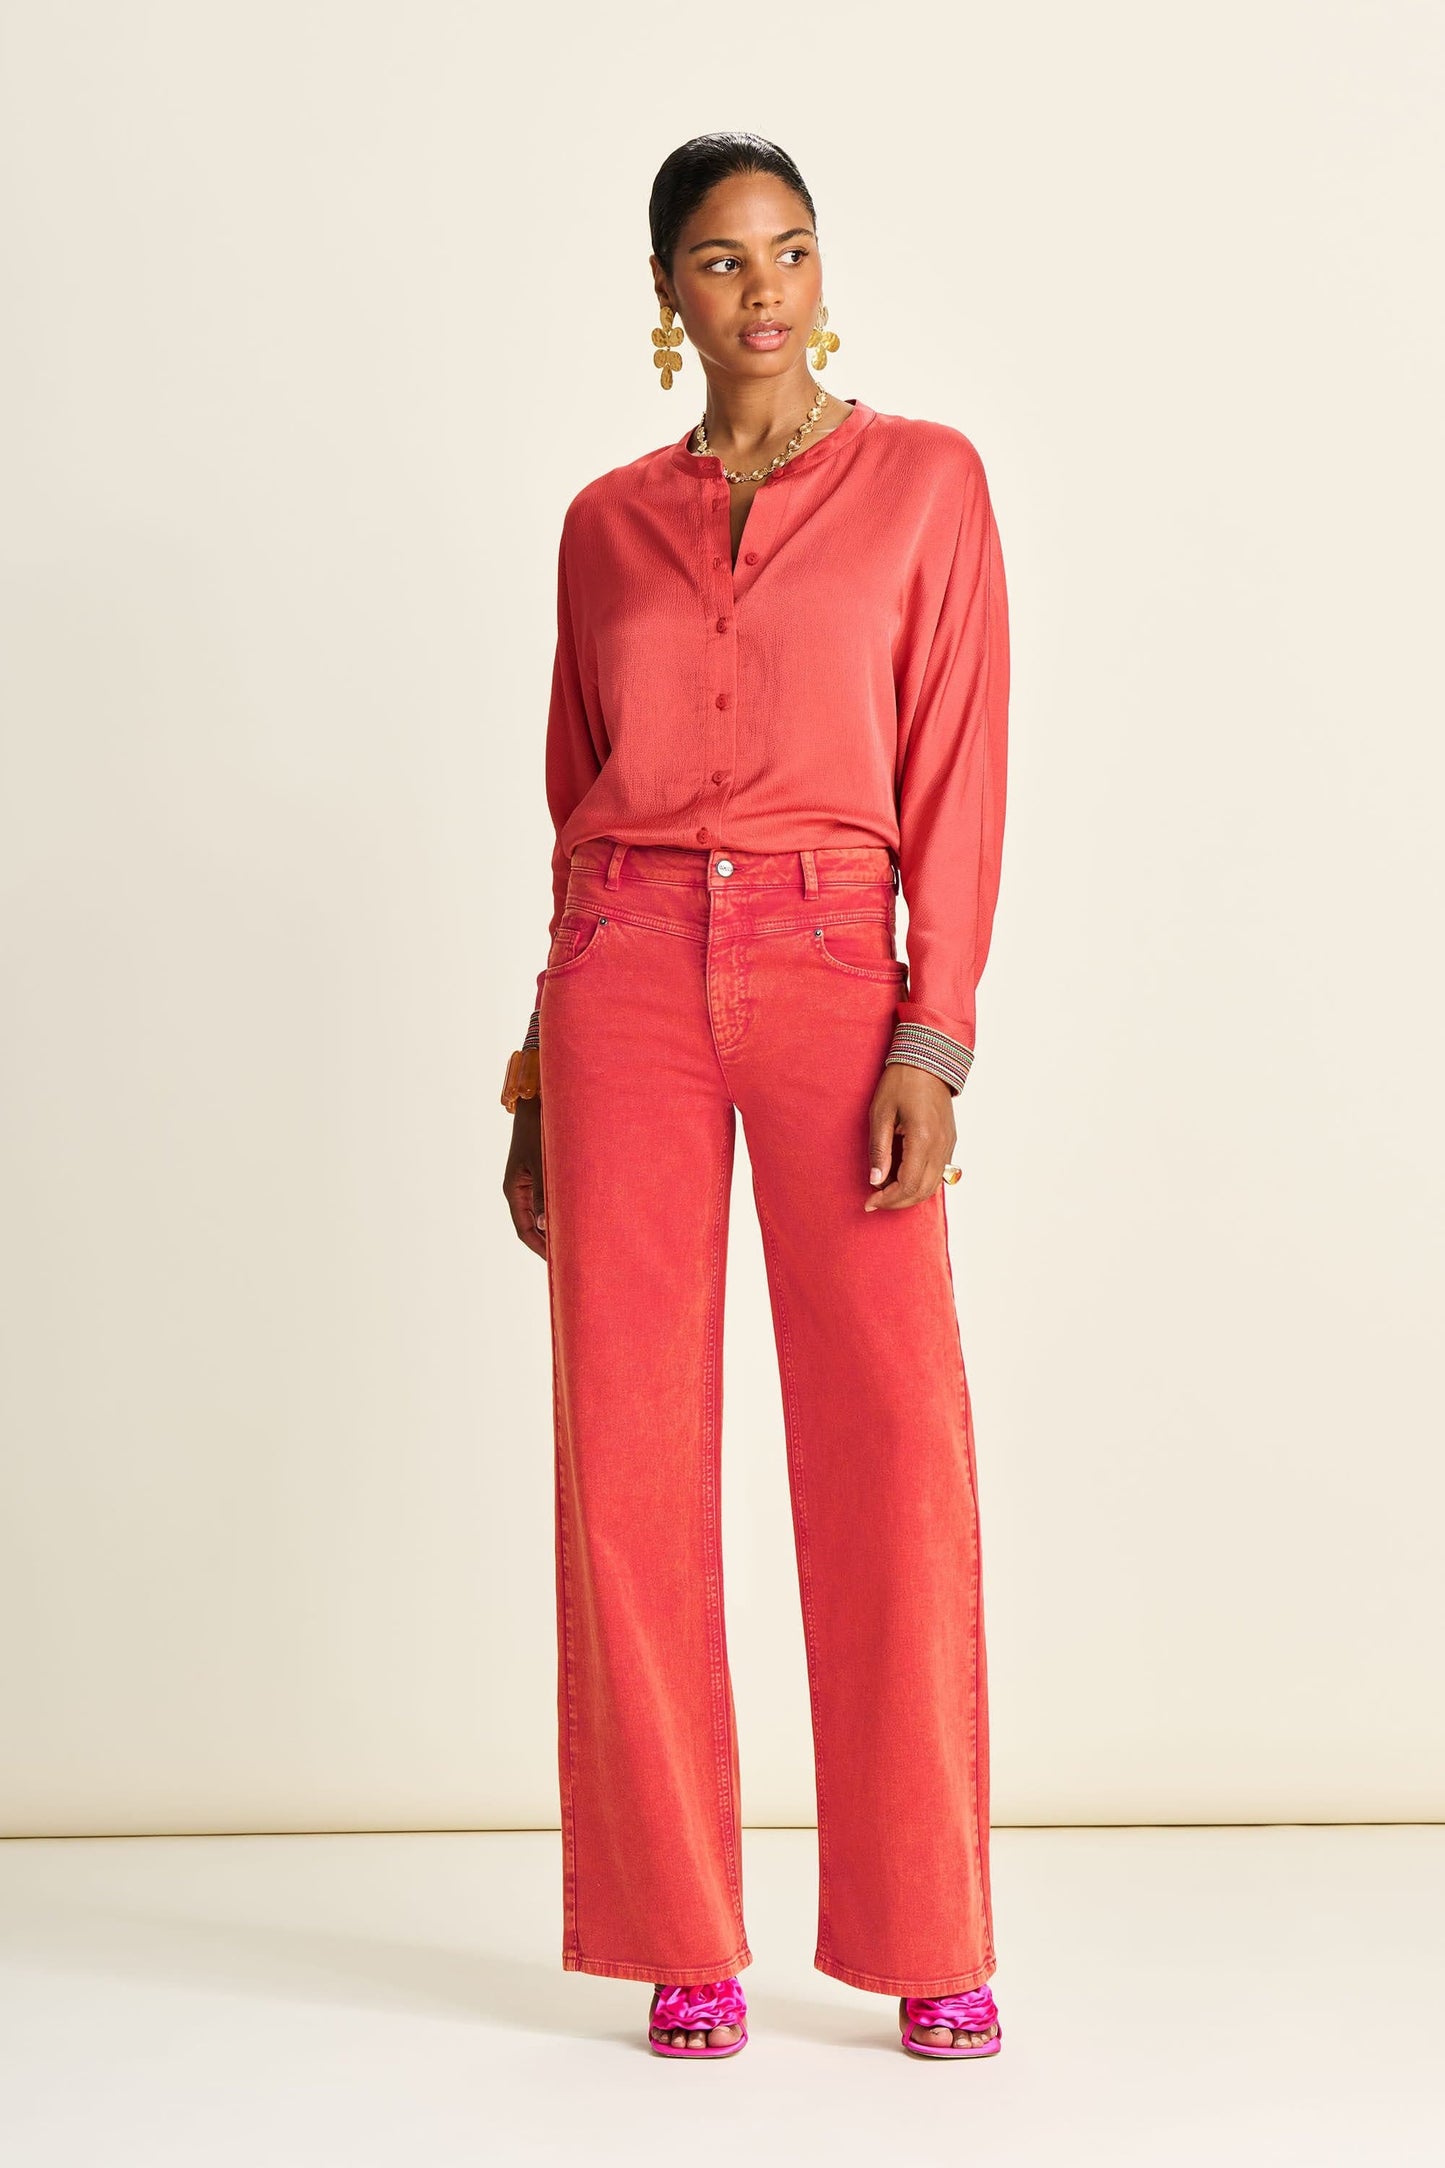 JEANS - Wide Leg Baked Red